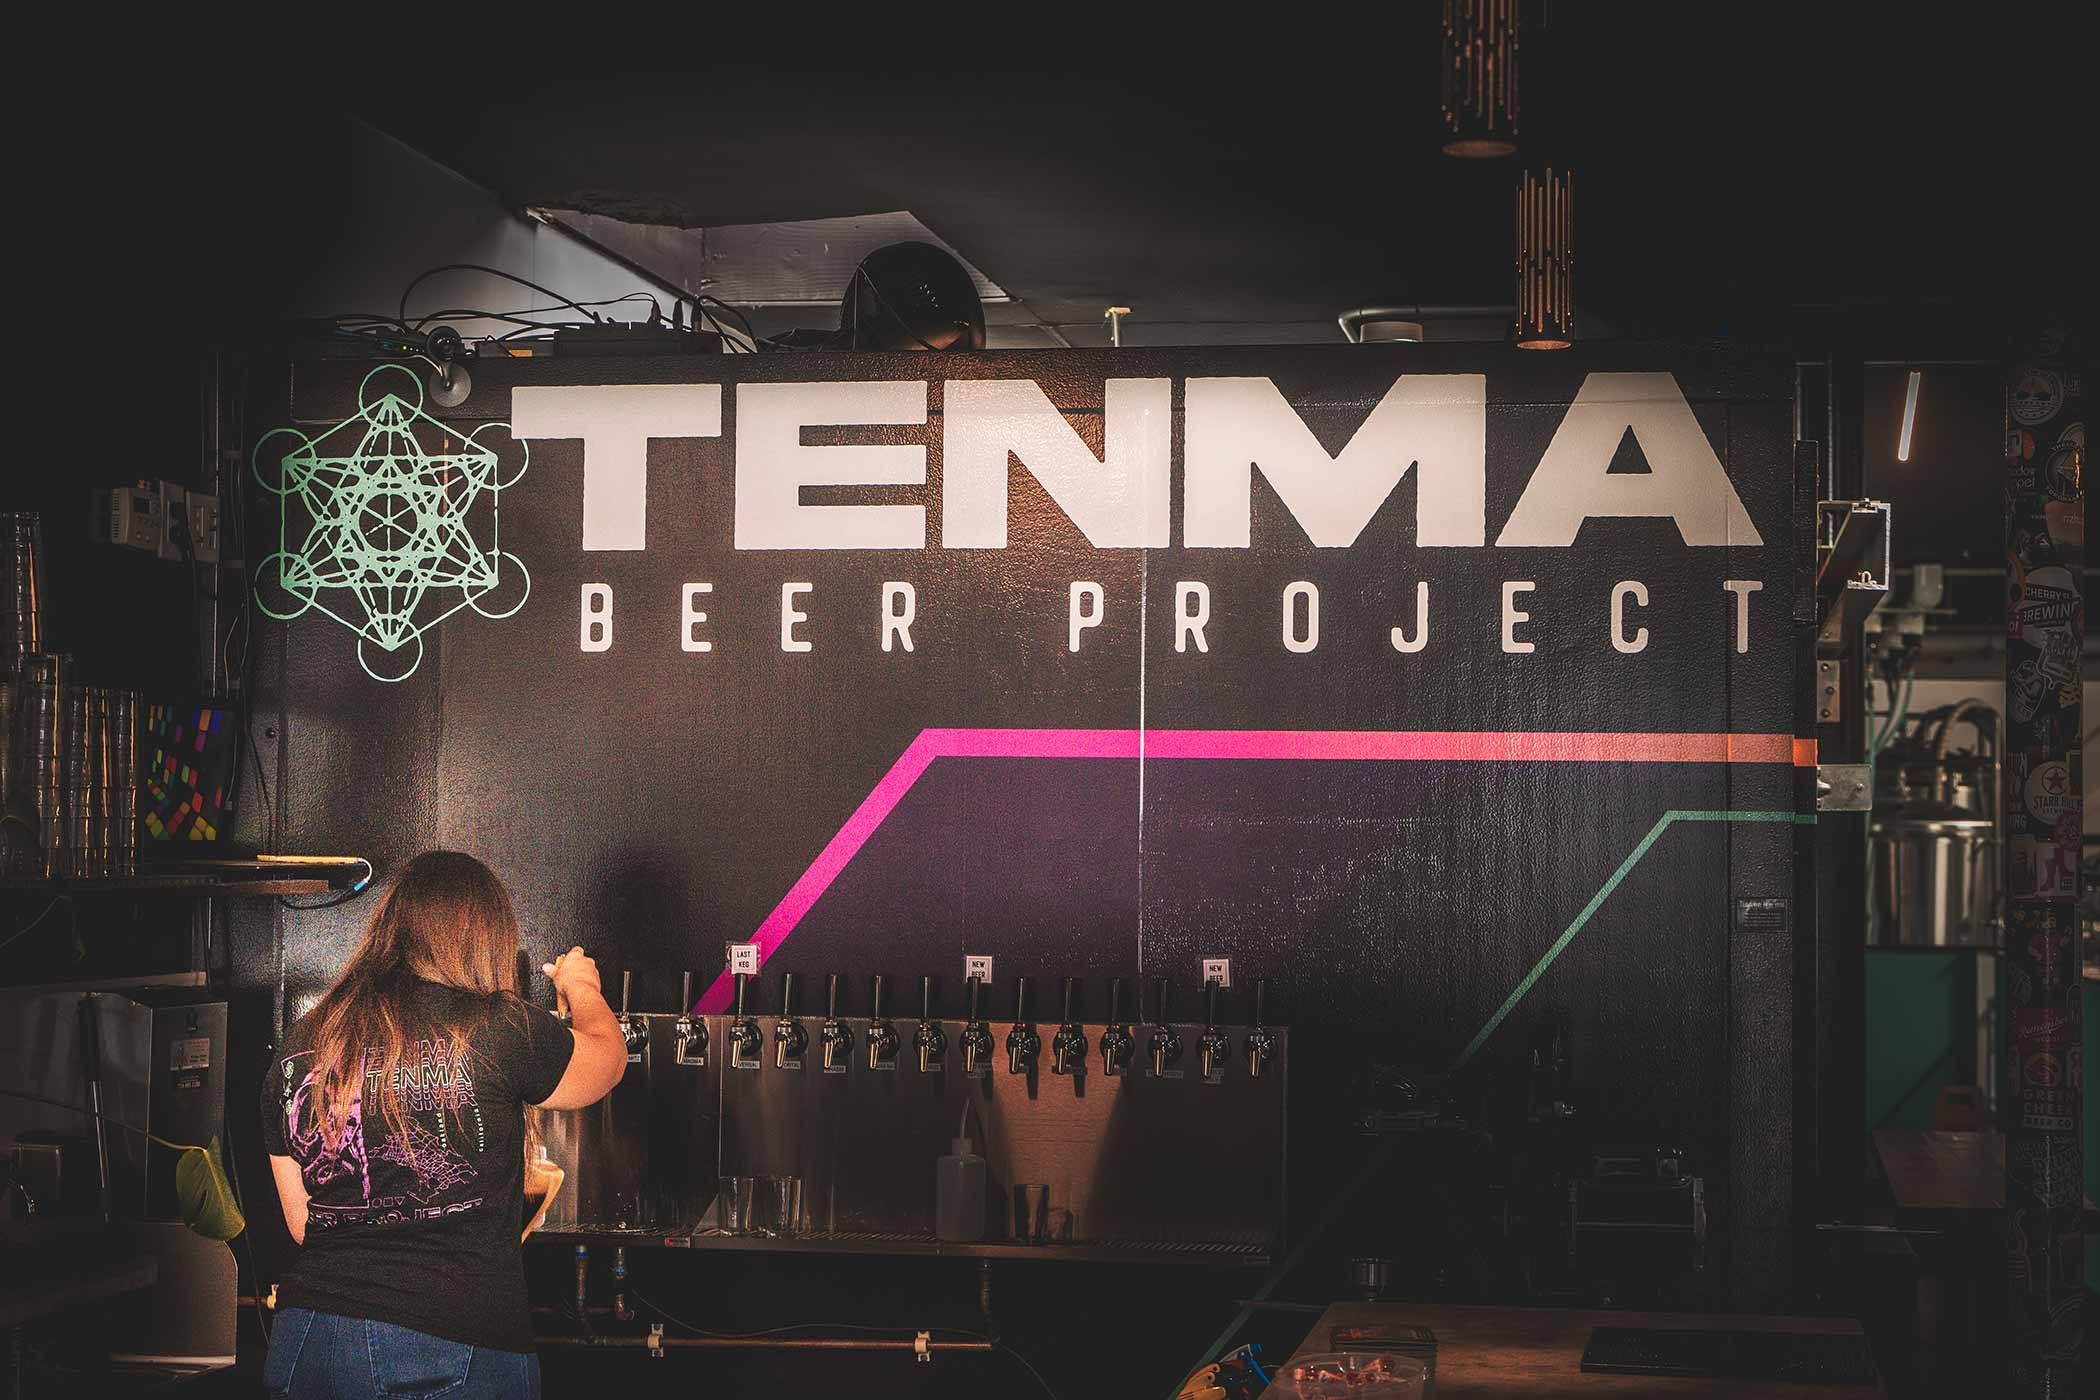 Tenma Beer Project: Not a Brewery. Not a Brewing Company. A Beer Project